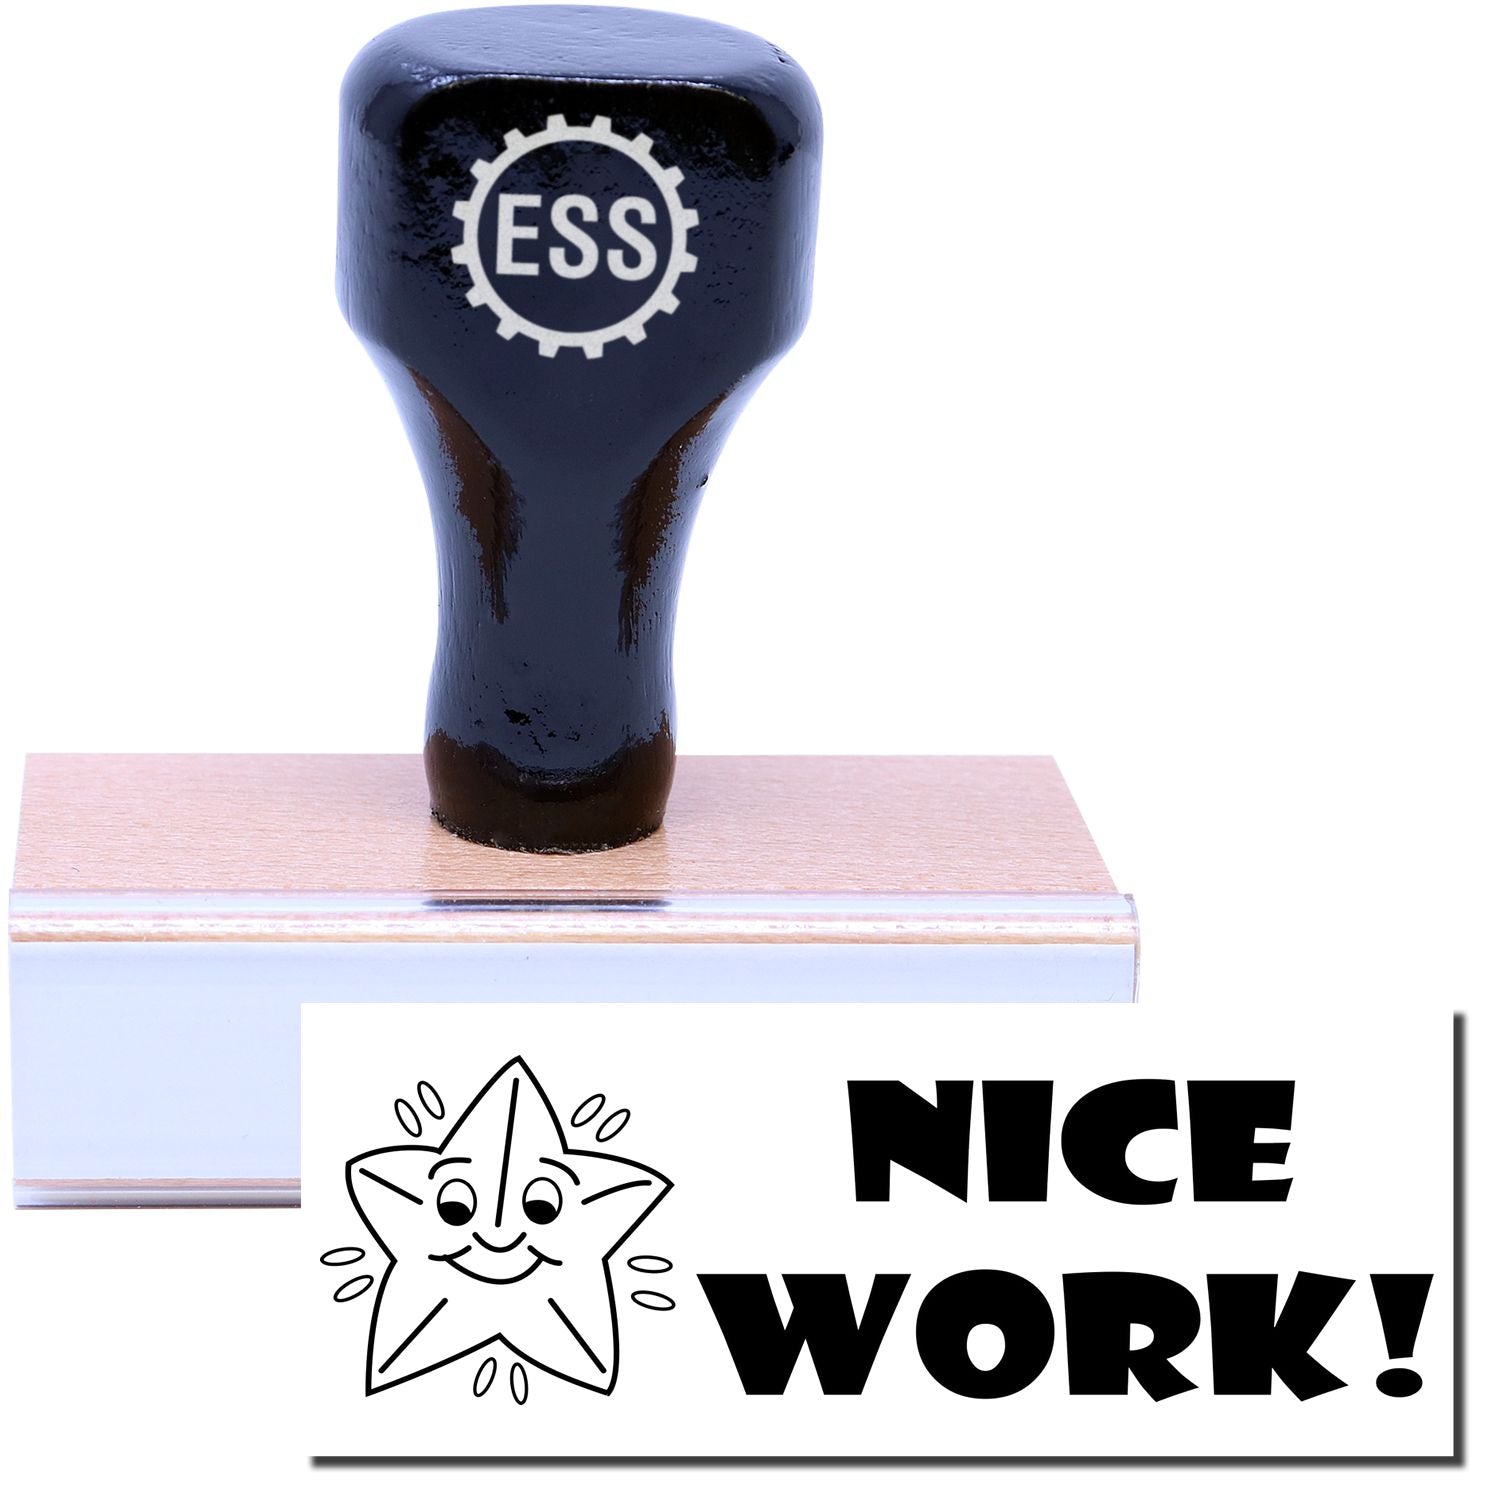 A stock office rubber stamp with a stamped image showing how the text "NICE WORK!" in bold font and a smiling starfish image is displayed after stamping.